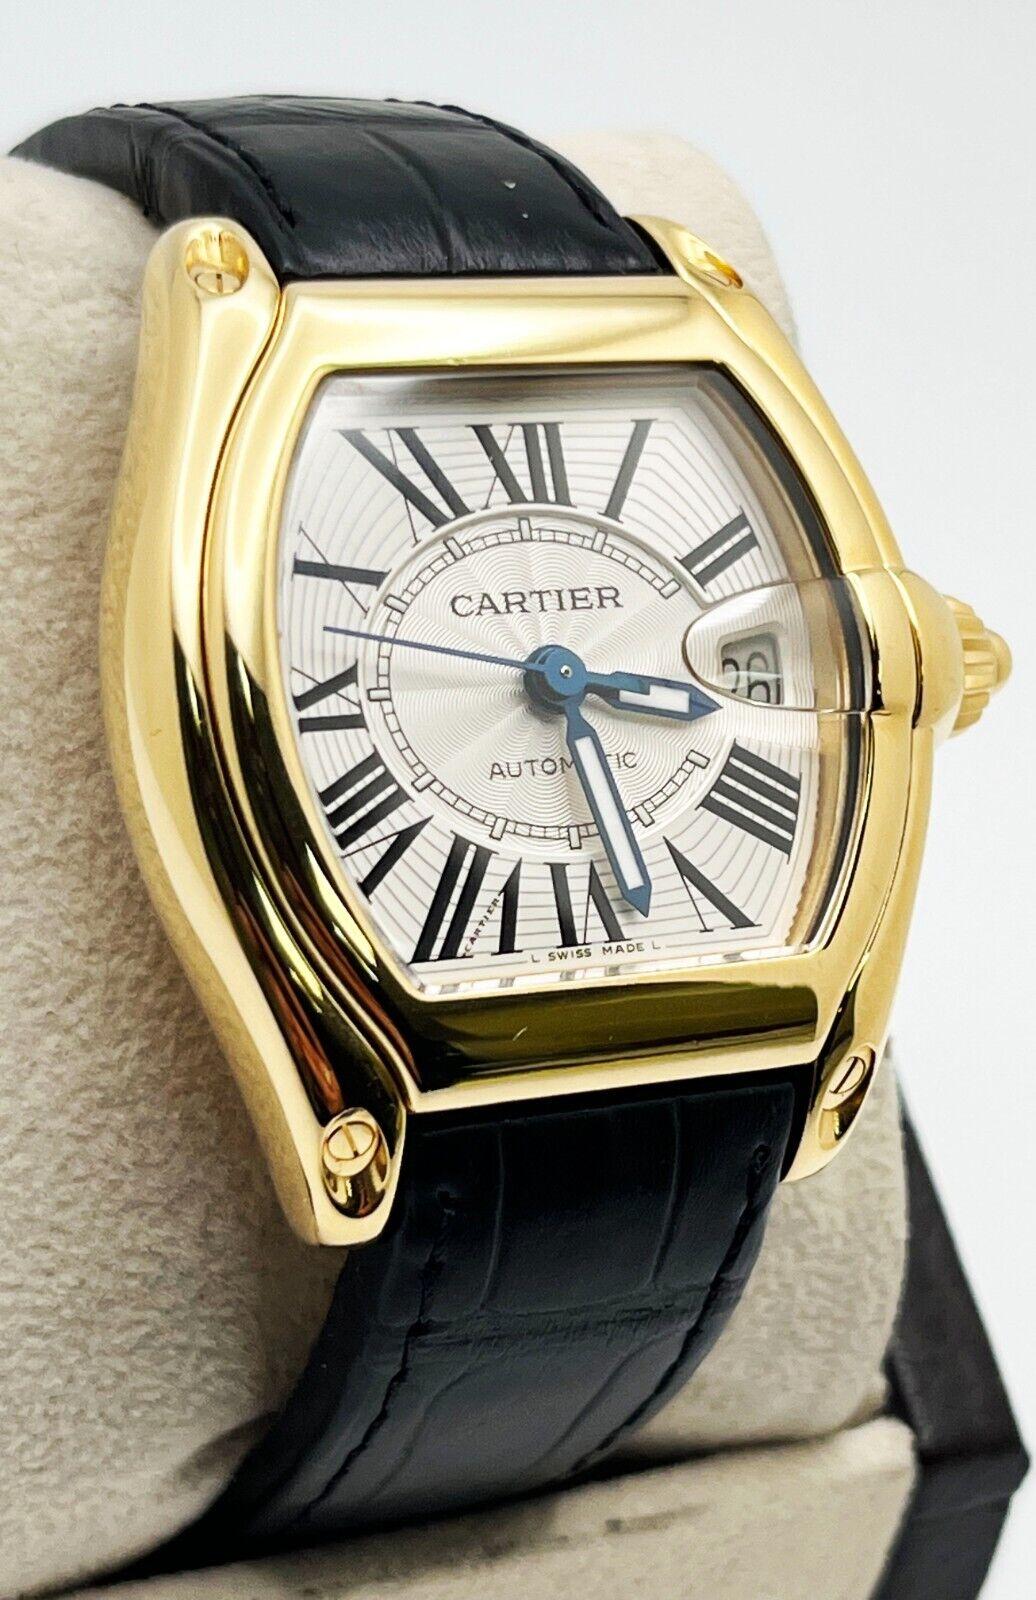 Style Number: 2524
 
Model: Roadster
 
Case Material: 18K Yellow Gold
 
Band: Black Leather Strap 
 
Bezel:  18K Yellow Gold 
 
Dial: Silver
 
Face: Sapphire Crystal 
 
Case Size:  37mm x 44mm
 
Includes: 
-Elegant Watch Box
-Certified Appraisal 
-1